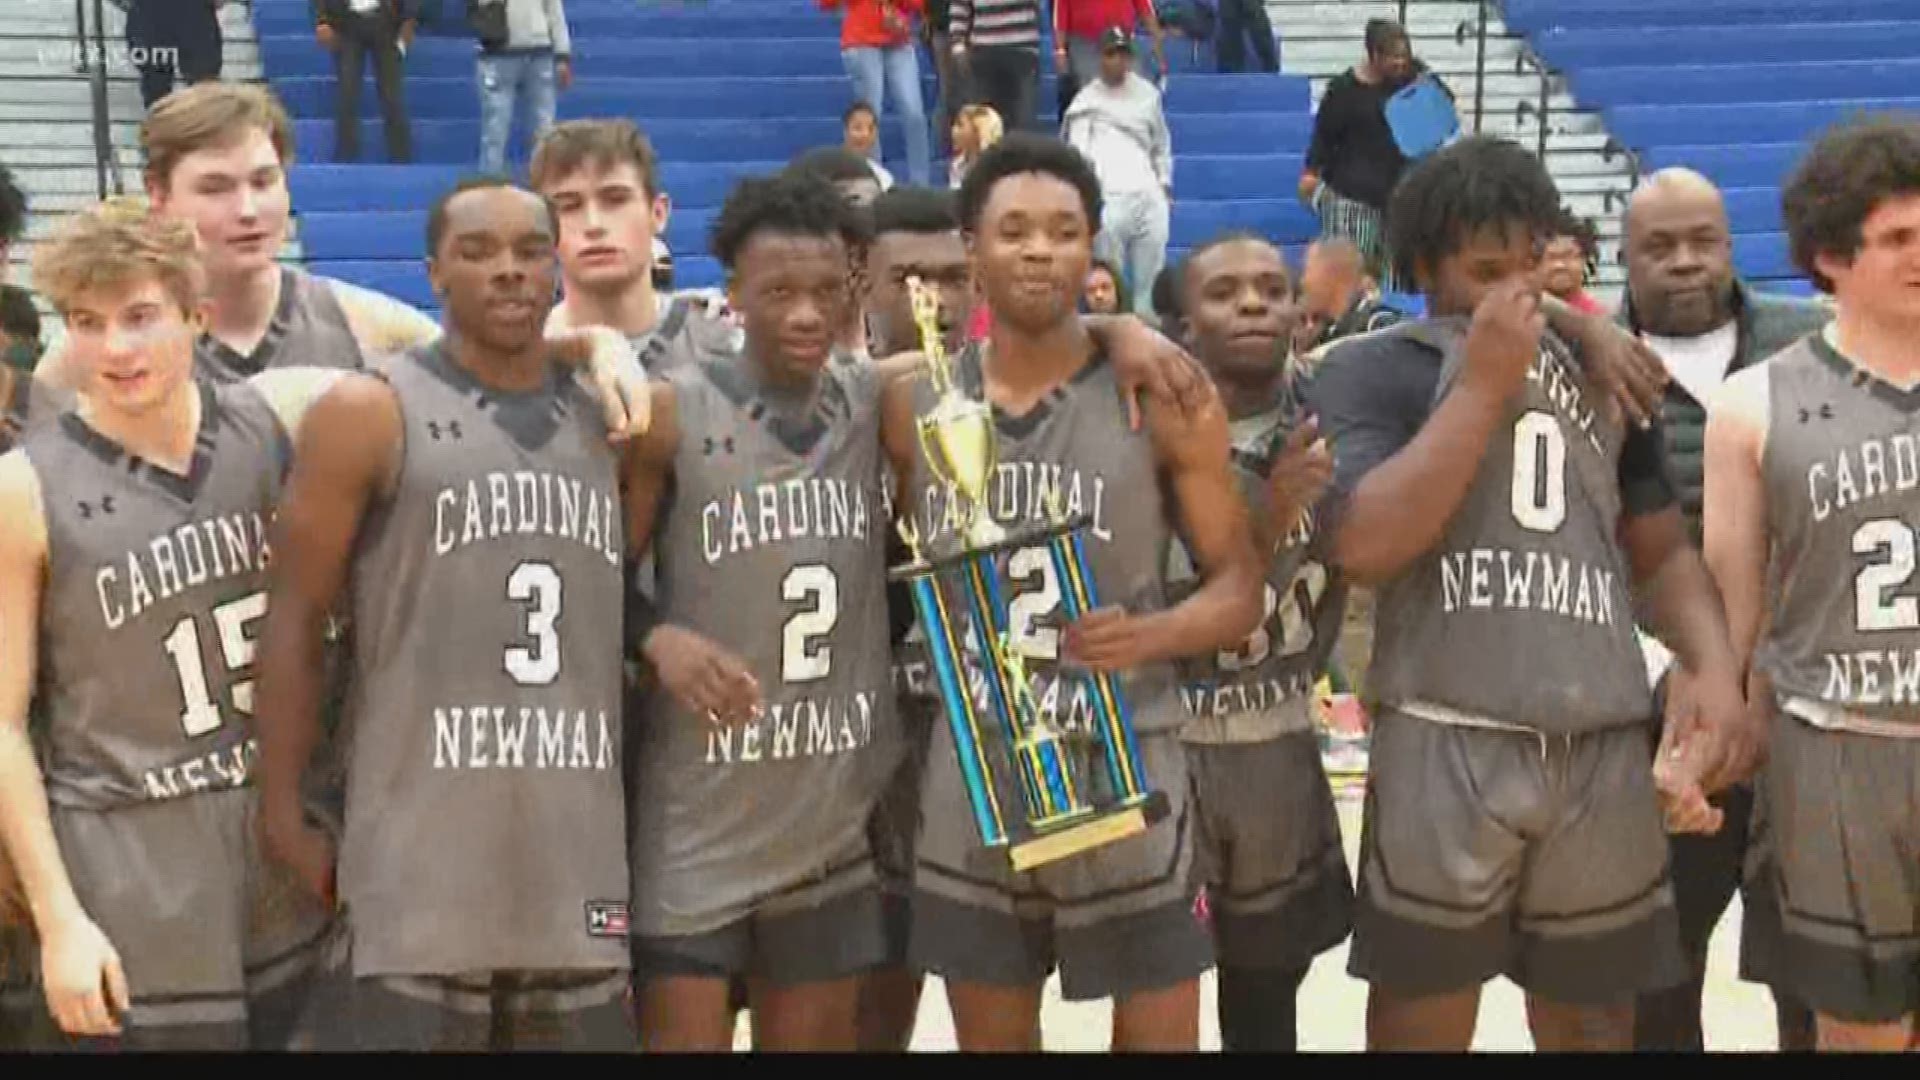 Cardinal Newman defeated W.J. Keenan 57-50 to win the George Glymph bracket of the Schlotzky’s Carolina Thanksgiving Tip-Off